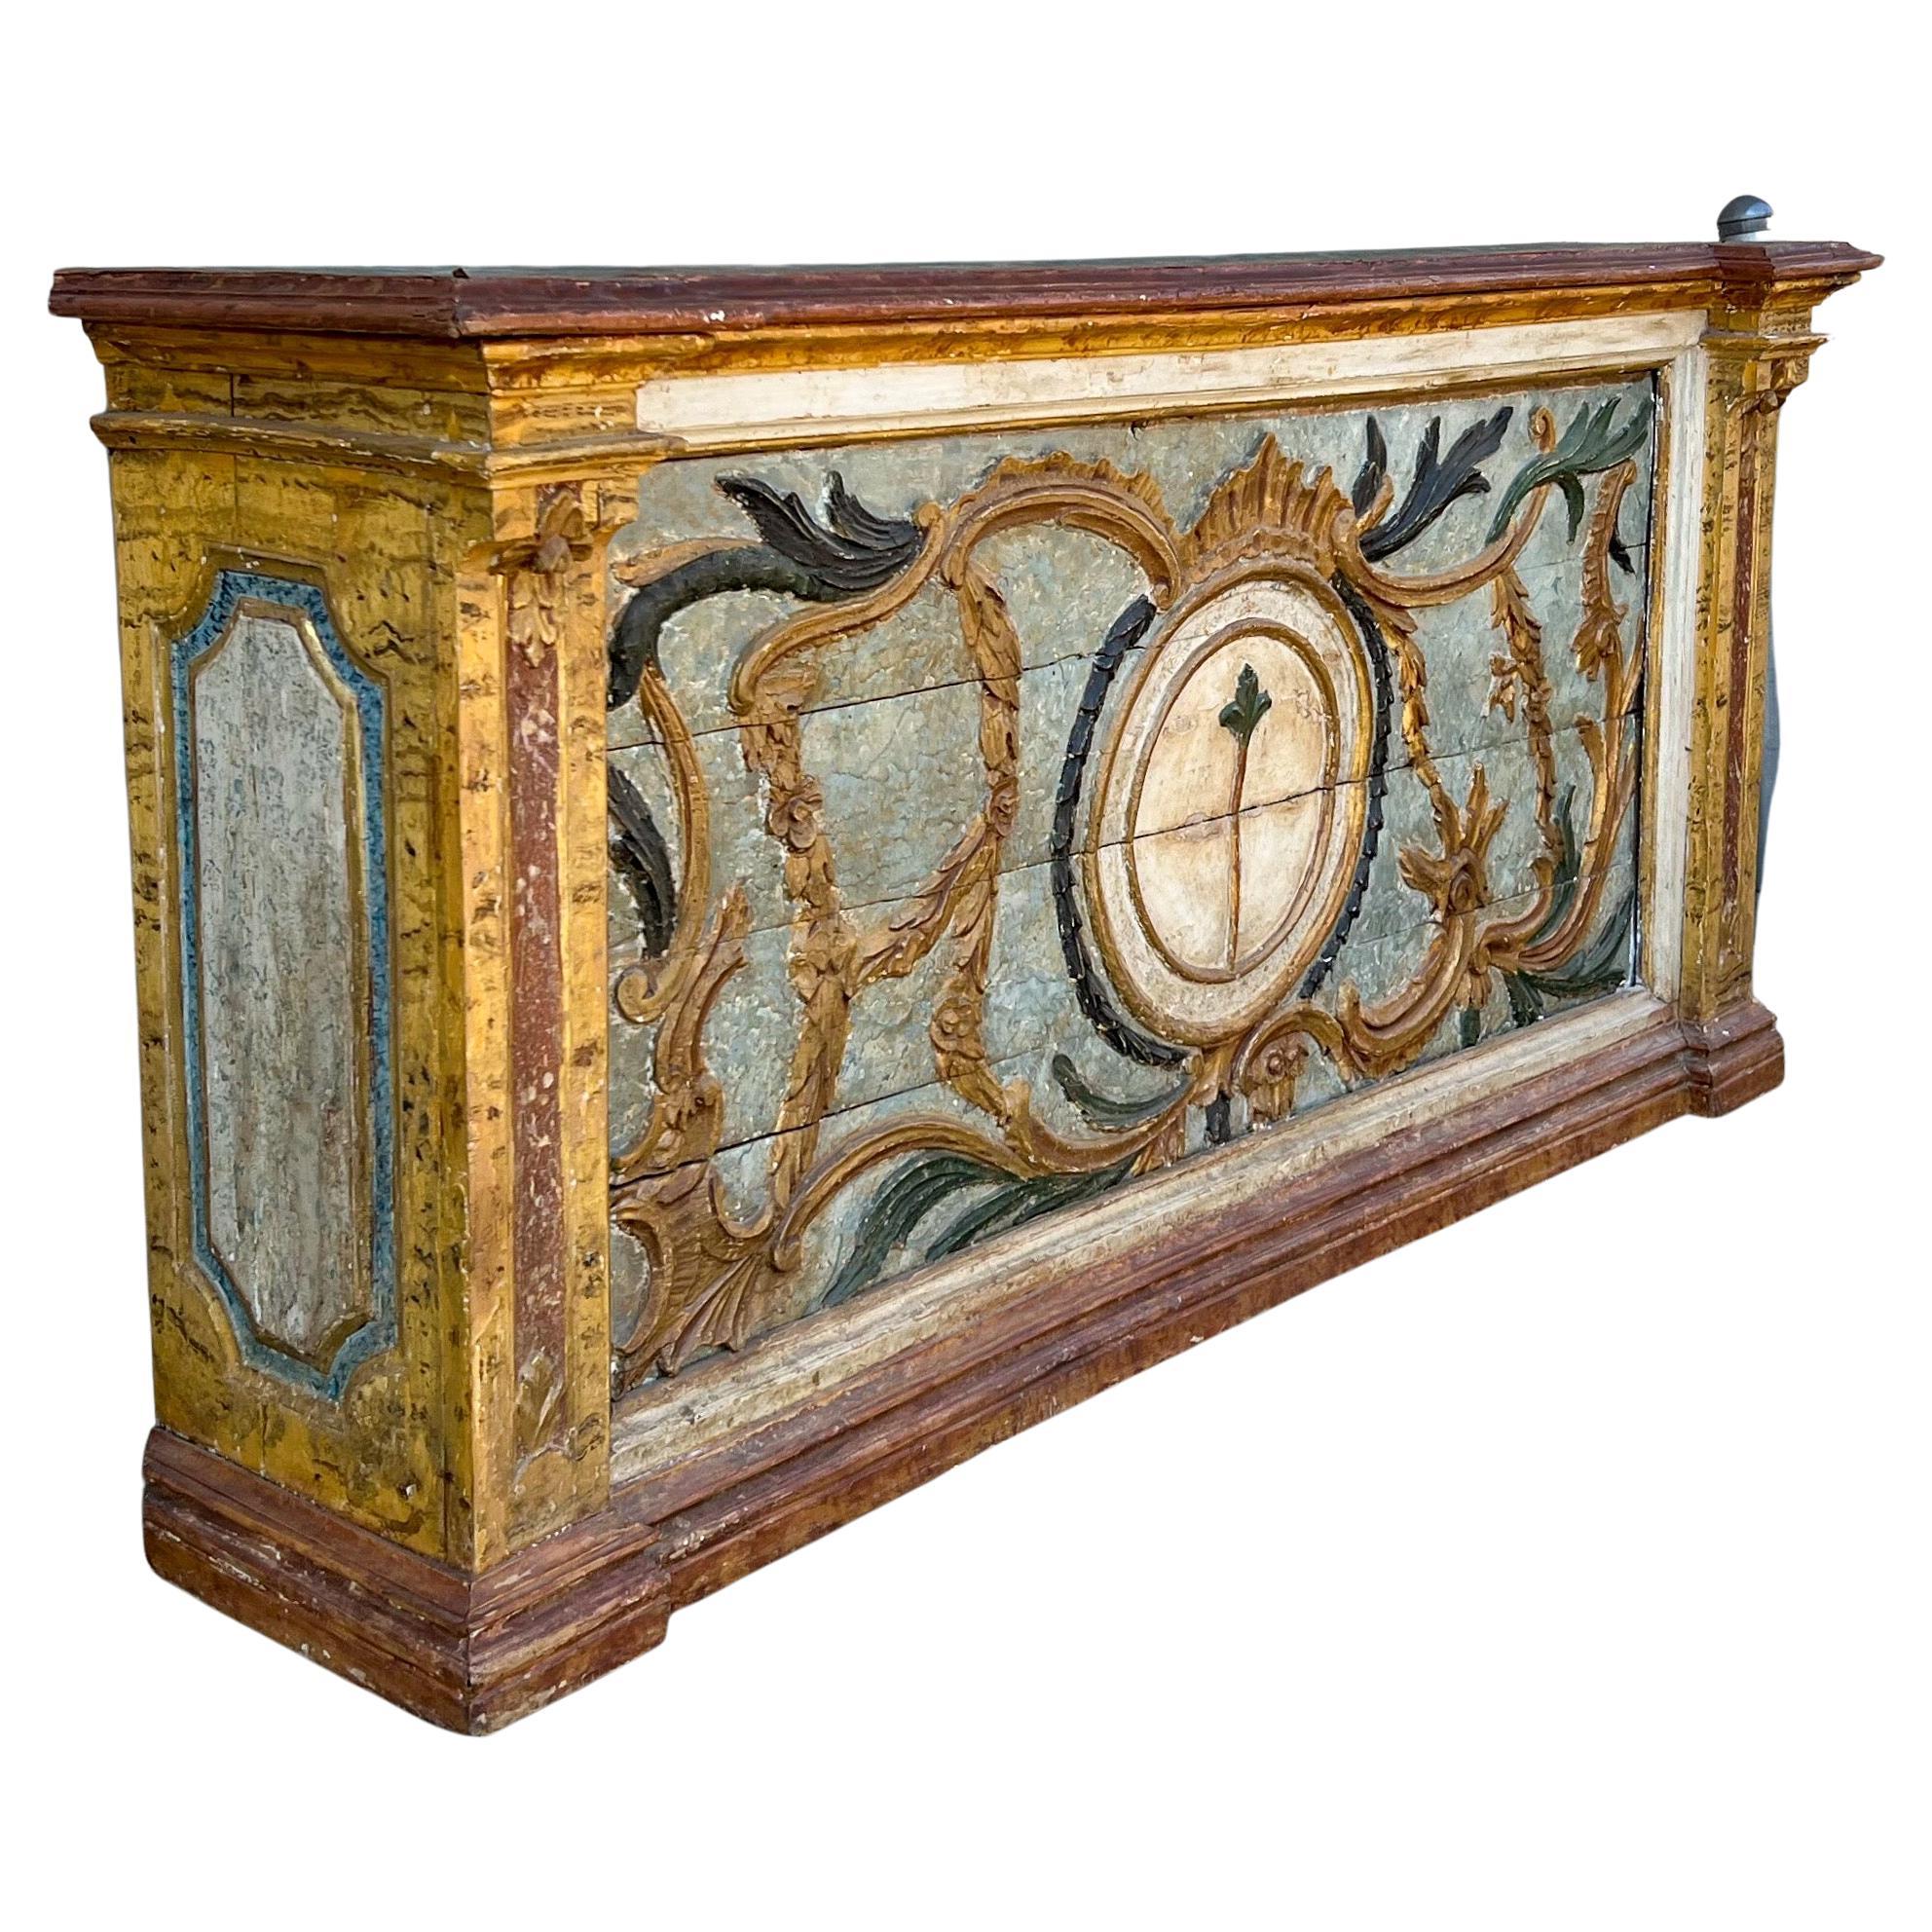 This is a majestic piece! It is a nineteenth century Italian hand painted credenza. The piece has neo-classical form, and the top, a later addition, appears to be embossed leather. 

My shipping is for the Continental US only.